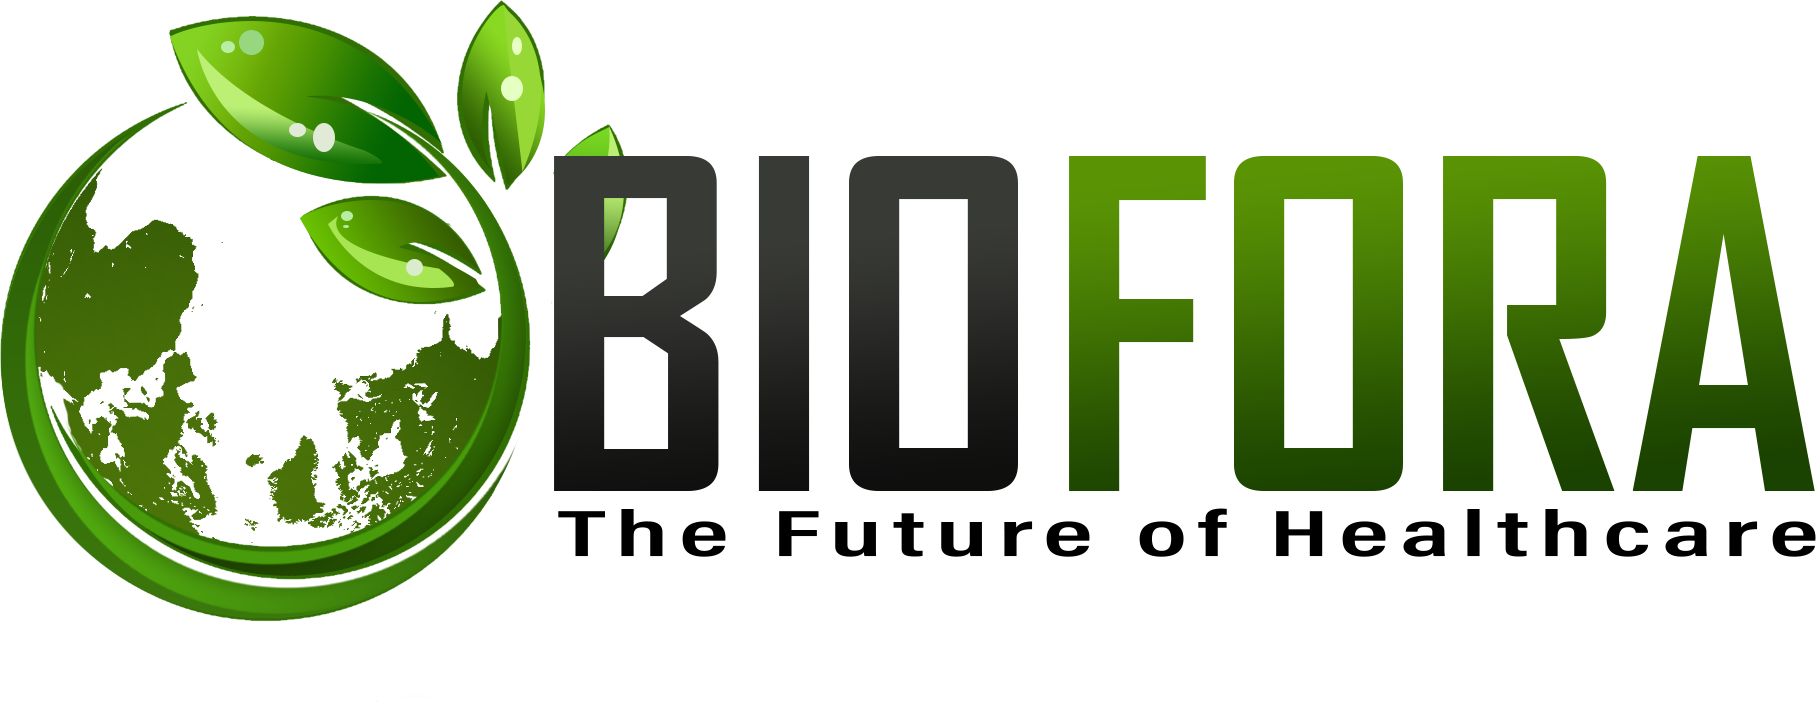 Biofora- Global Cardiology and Healthcare Summit